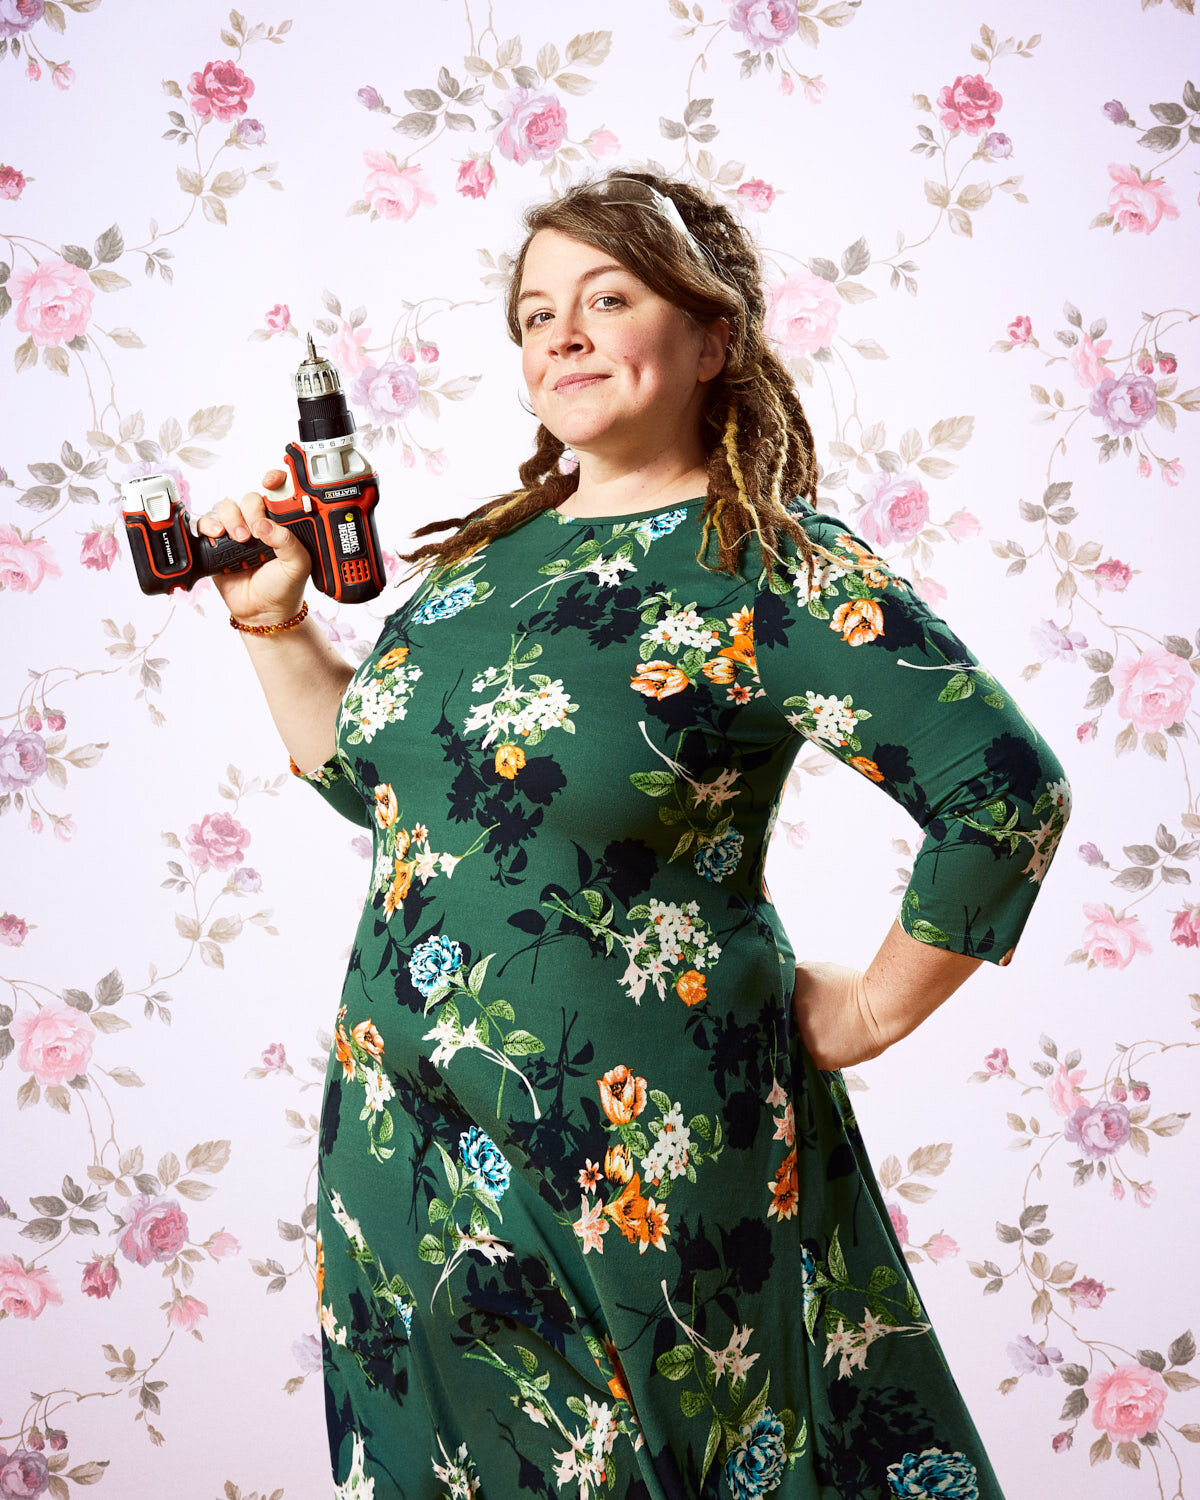 mom with dreadlocks, floral dress, and power drill with vintage floral wallpaper by creative portrait photographer Hanna Agar